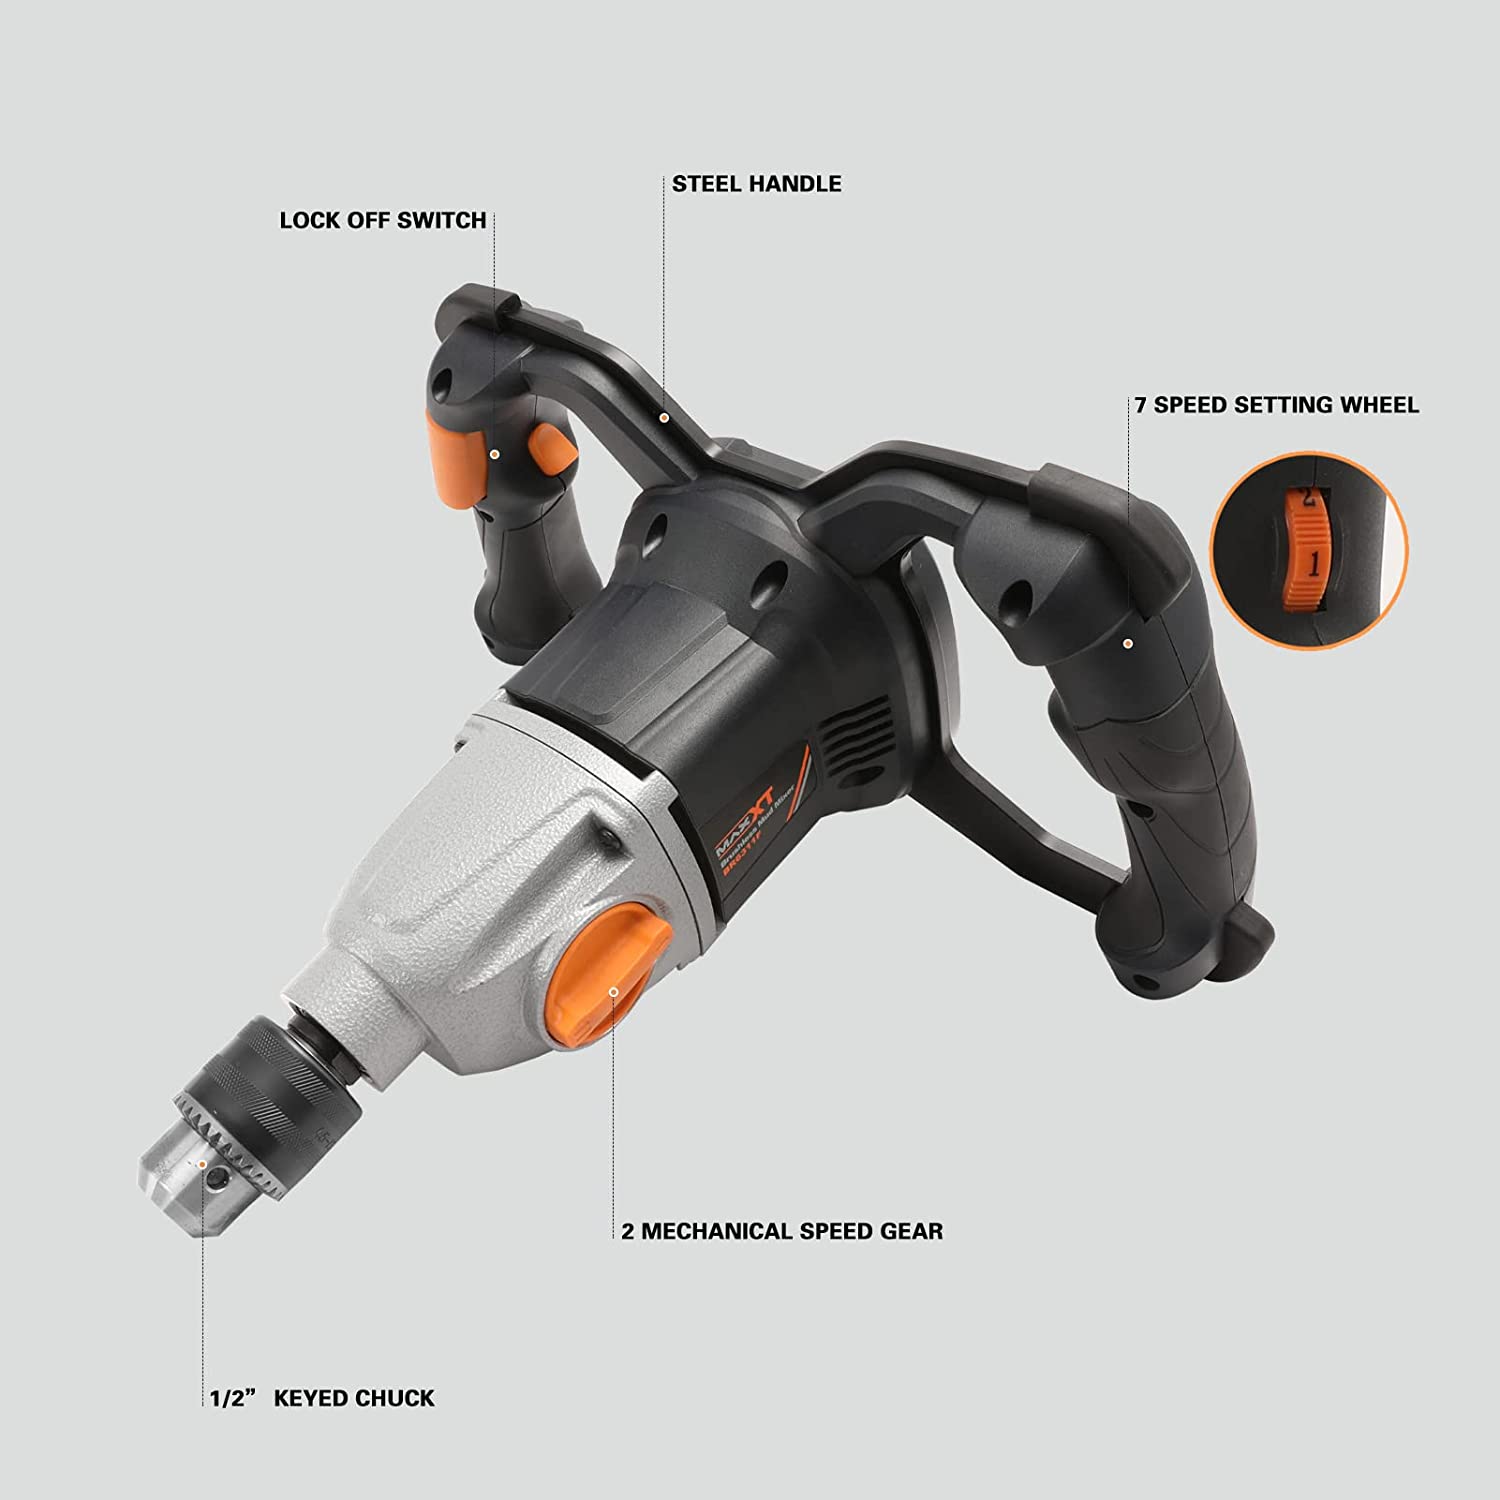 20V Brushless Cordless 1/2 in. Mud Mixer, Tool Only